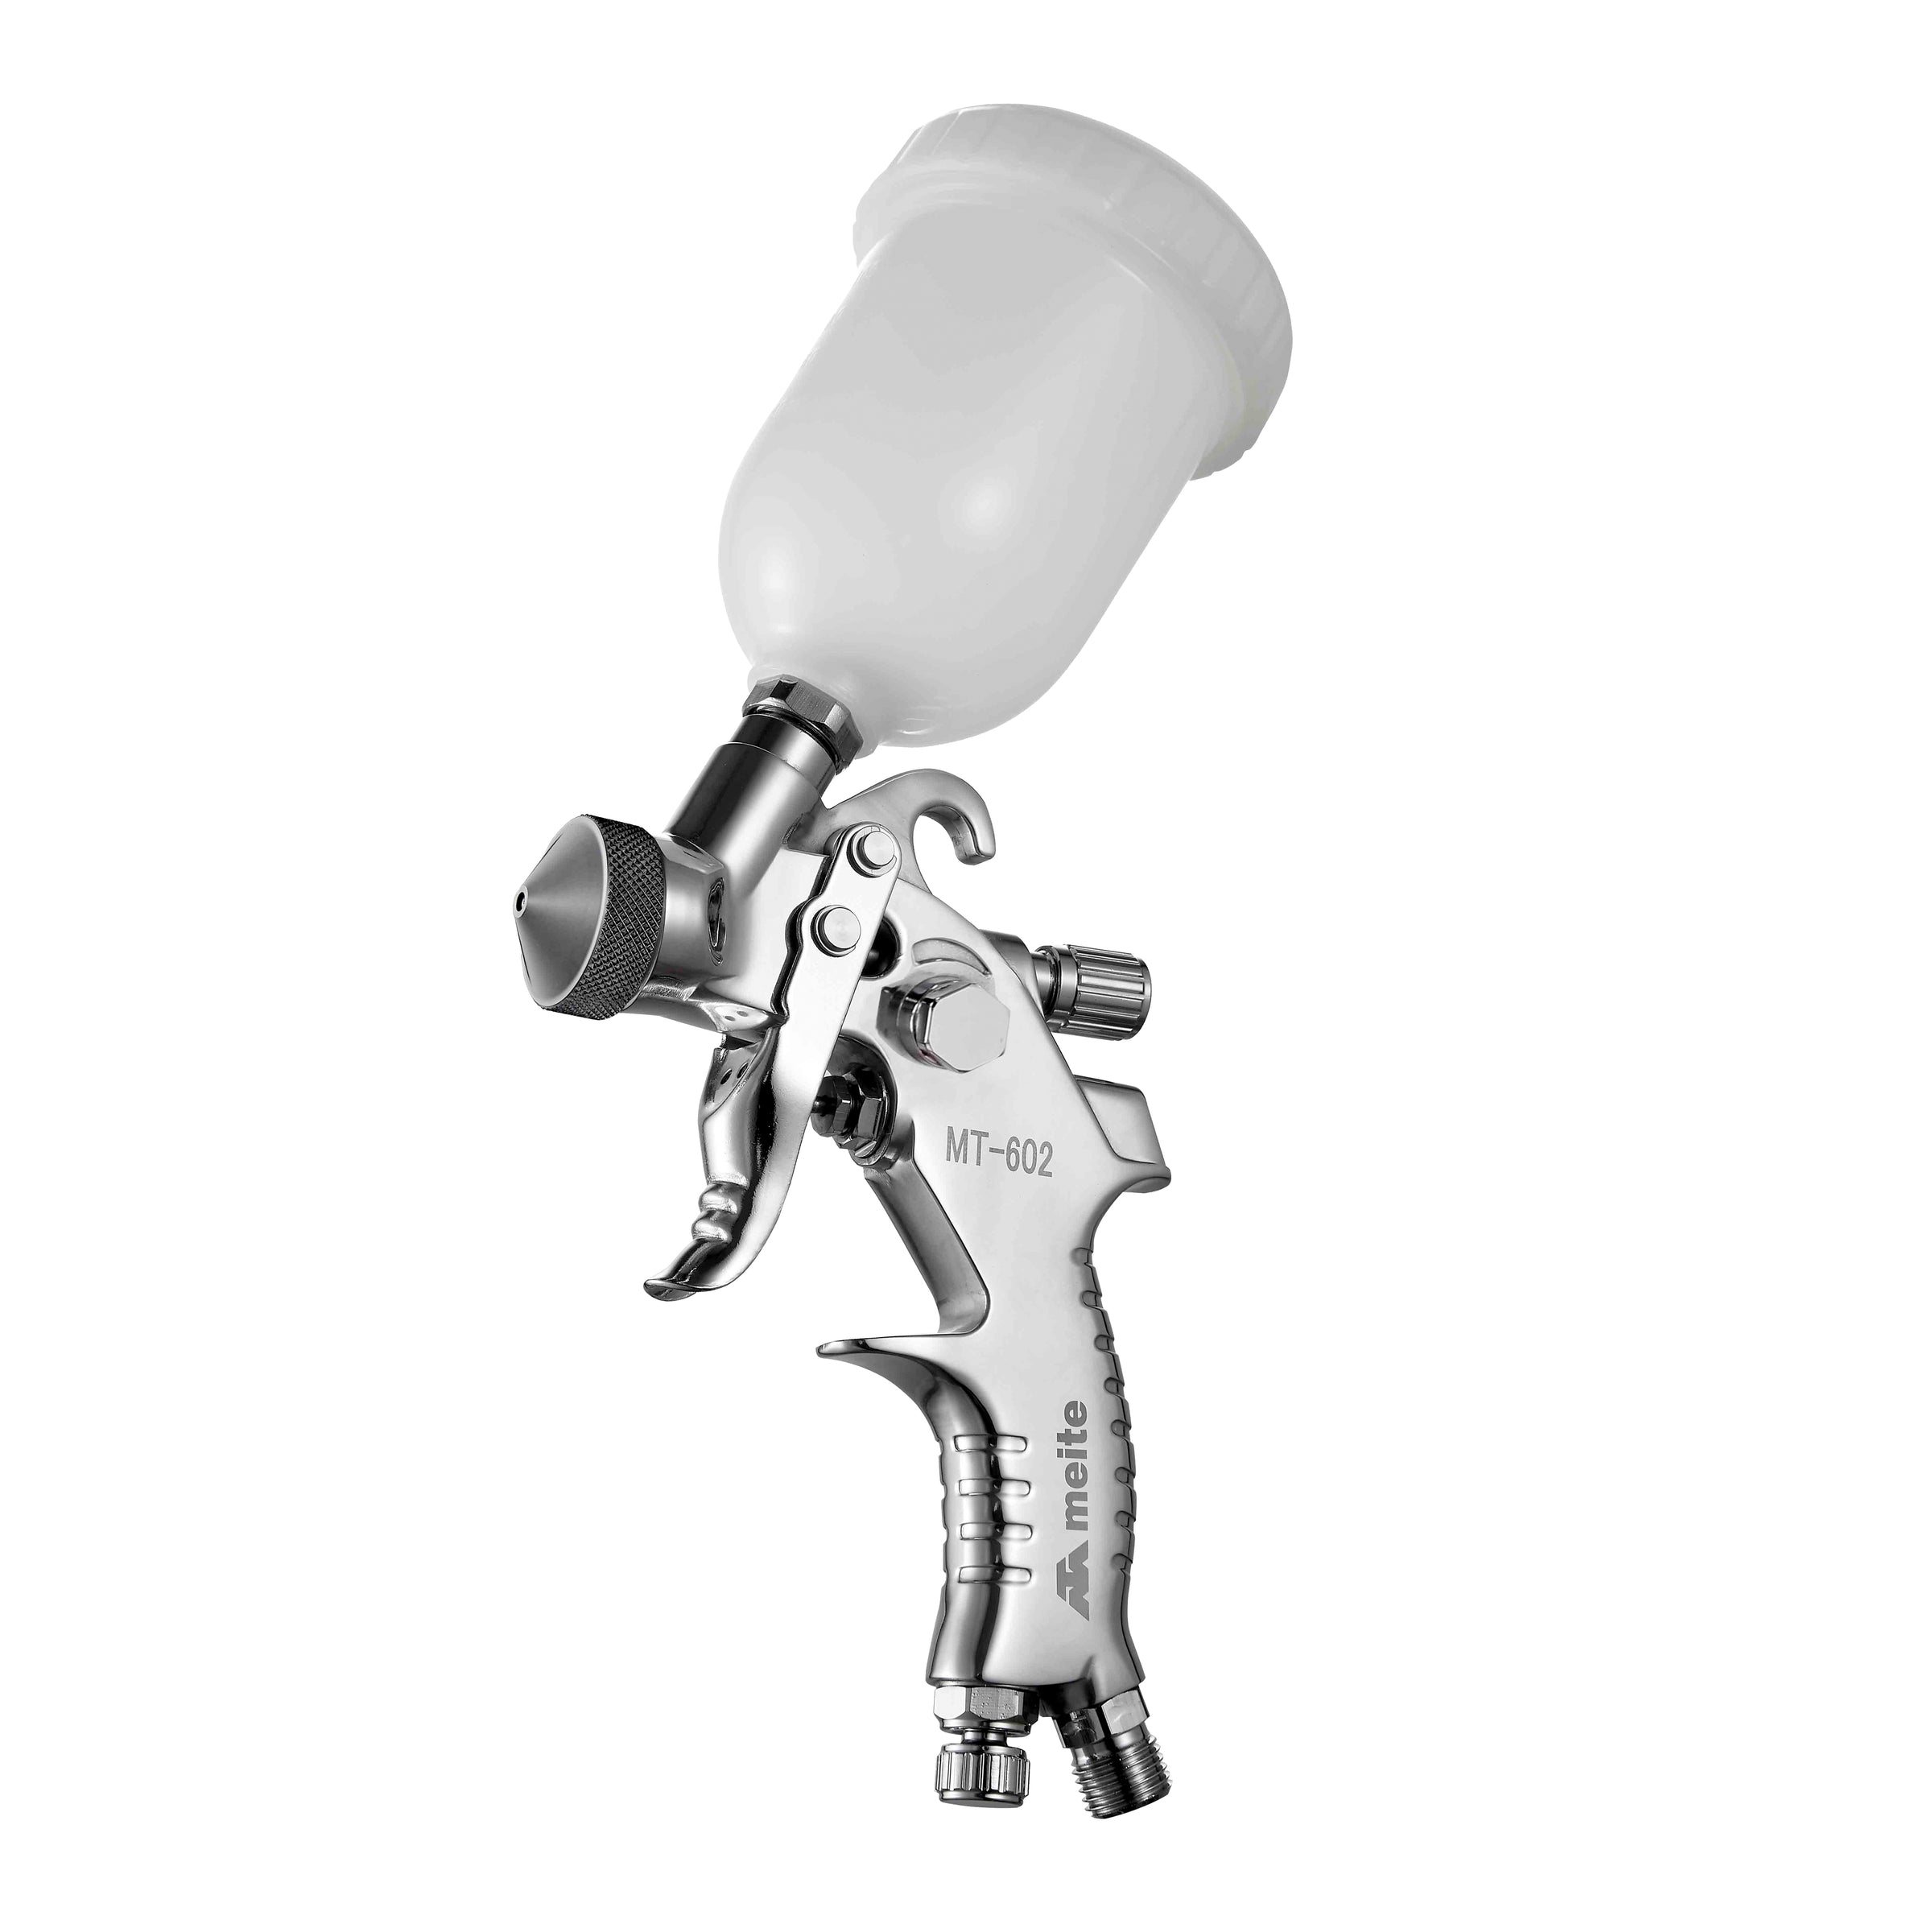 ANEST IWATA 5273 LPH50 Series HVLP Gravity Feed Miniature Spray Gun with  Cup, 0.6 mm Nozzle